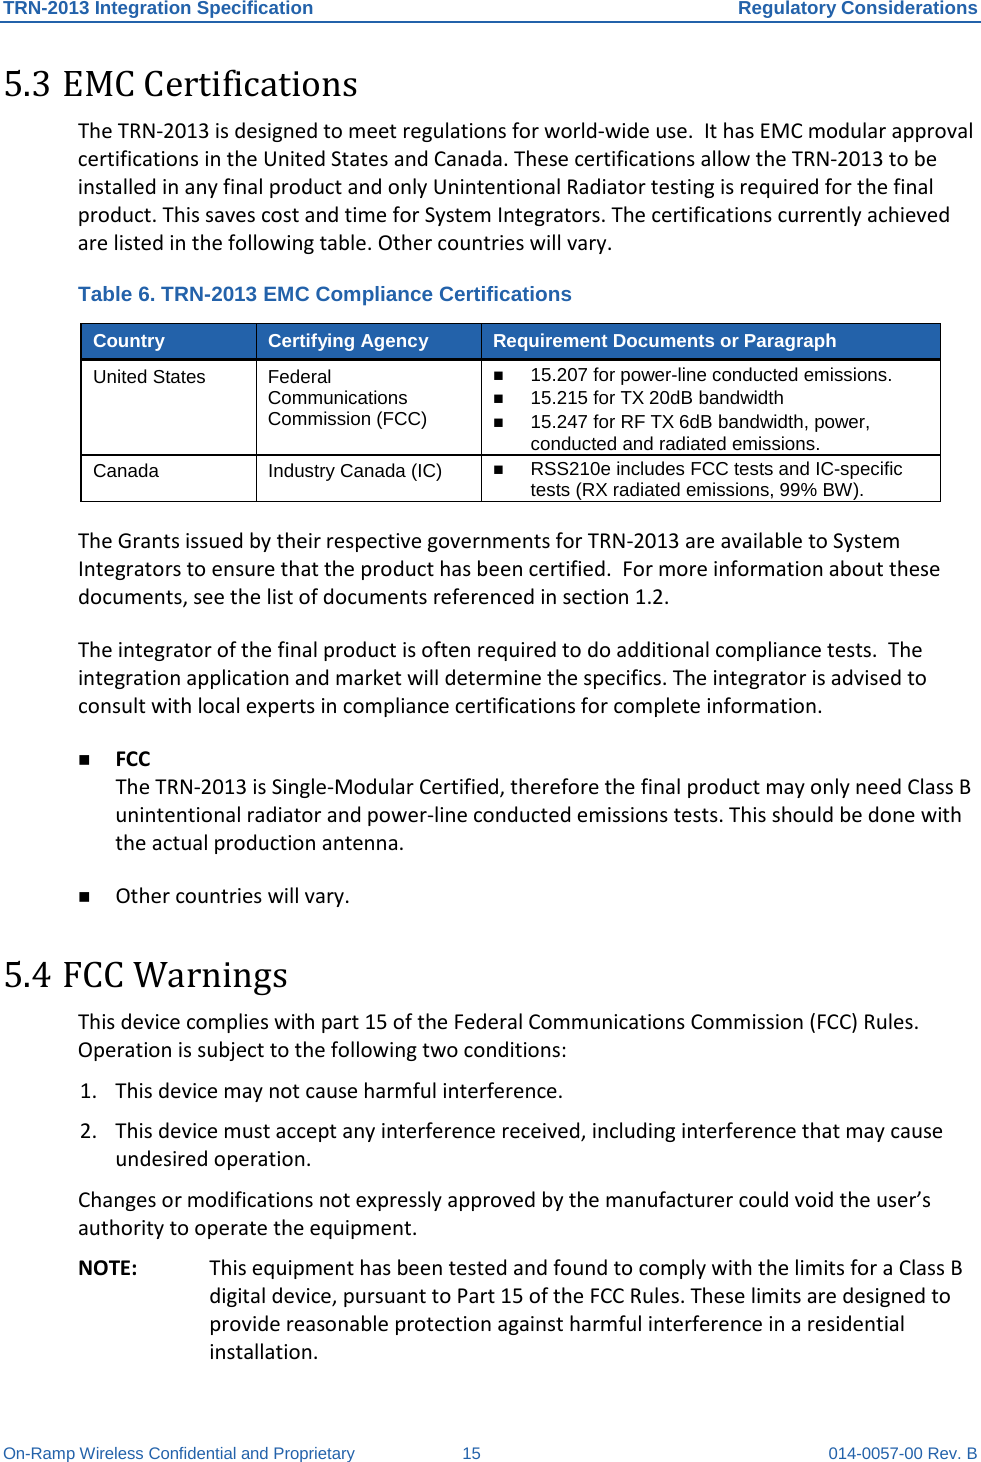 TRN-2013 Integration Specification Regulatory Considerations On-Ramp Wireless Confidential and Proprietary 15 014-0057-00 Rev. B 5.3 EMC Certifications The TRN-2013 is designed to meet regulations for world-wide use.  It has EMC modular approval certifications in the United States and Canada. These certifications allow the TRN-2013 to be installed in any final product and only Unintentional Radiator testing is required for the final product. This saves cost and time for System Integrators. The certifications currently achieved are listed in the following table. Other countries will vary. Table 6. TRN-2013 EMC Compliance Certifications Country Certifying Agency Requirement Documents or Paragraph United States Federal Communications Commission (FCC)  15.207 for power-line conducted emissions.  15.215 for TX 20dB bandwidth  15.247 for RF TX 6dB bandwidth, power, conducted and radiated emissions. Canada Industry Canada (IC)  RSS210e includes FCC tests and IC-specific tests (RX radiated emissions, 99% BW). The Grants issued by their respective governments for TRN-2013 are available to System Integrators to ensure that the product has been certified.  For more information about these documents, see the list of documents referenced in section 1.2. The integrator of the final product is often required to do additional compliance tests.  The integration application and market will determine the specifics. The integrator is advised to consult with local experts in compliance certifications for complete information.  FCC The TRN-2013 is Single-Modular Certified, therefore the final product may only need Class B unintentional radiator and power-line conducted emissions tests. This should be done with the actual production antenna.  Other countries will vary. 5.4 FCC Warnings This device complies with part 15 of the Federal Communications Commission (FCC) Rules. Operation is subject to the following two conditions:  1. This device may not cause harmful interference. 2. This device must accept any interference received, including interference that may cause undesired operation. Changes or modifications not expressly approved by the manufacturer could void the user’s authority to operate the equipment. NOTE: This equipment has been tested and found to comply with the limits for a Class B digital device, pursuant to Part 15 of the FCC Rules. These limits are designed to provide reasonable protection against harmful interference in a residential installation. 